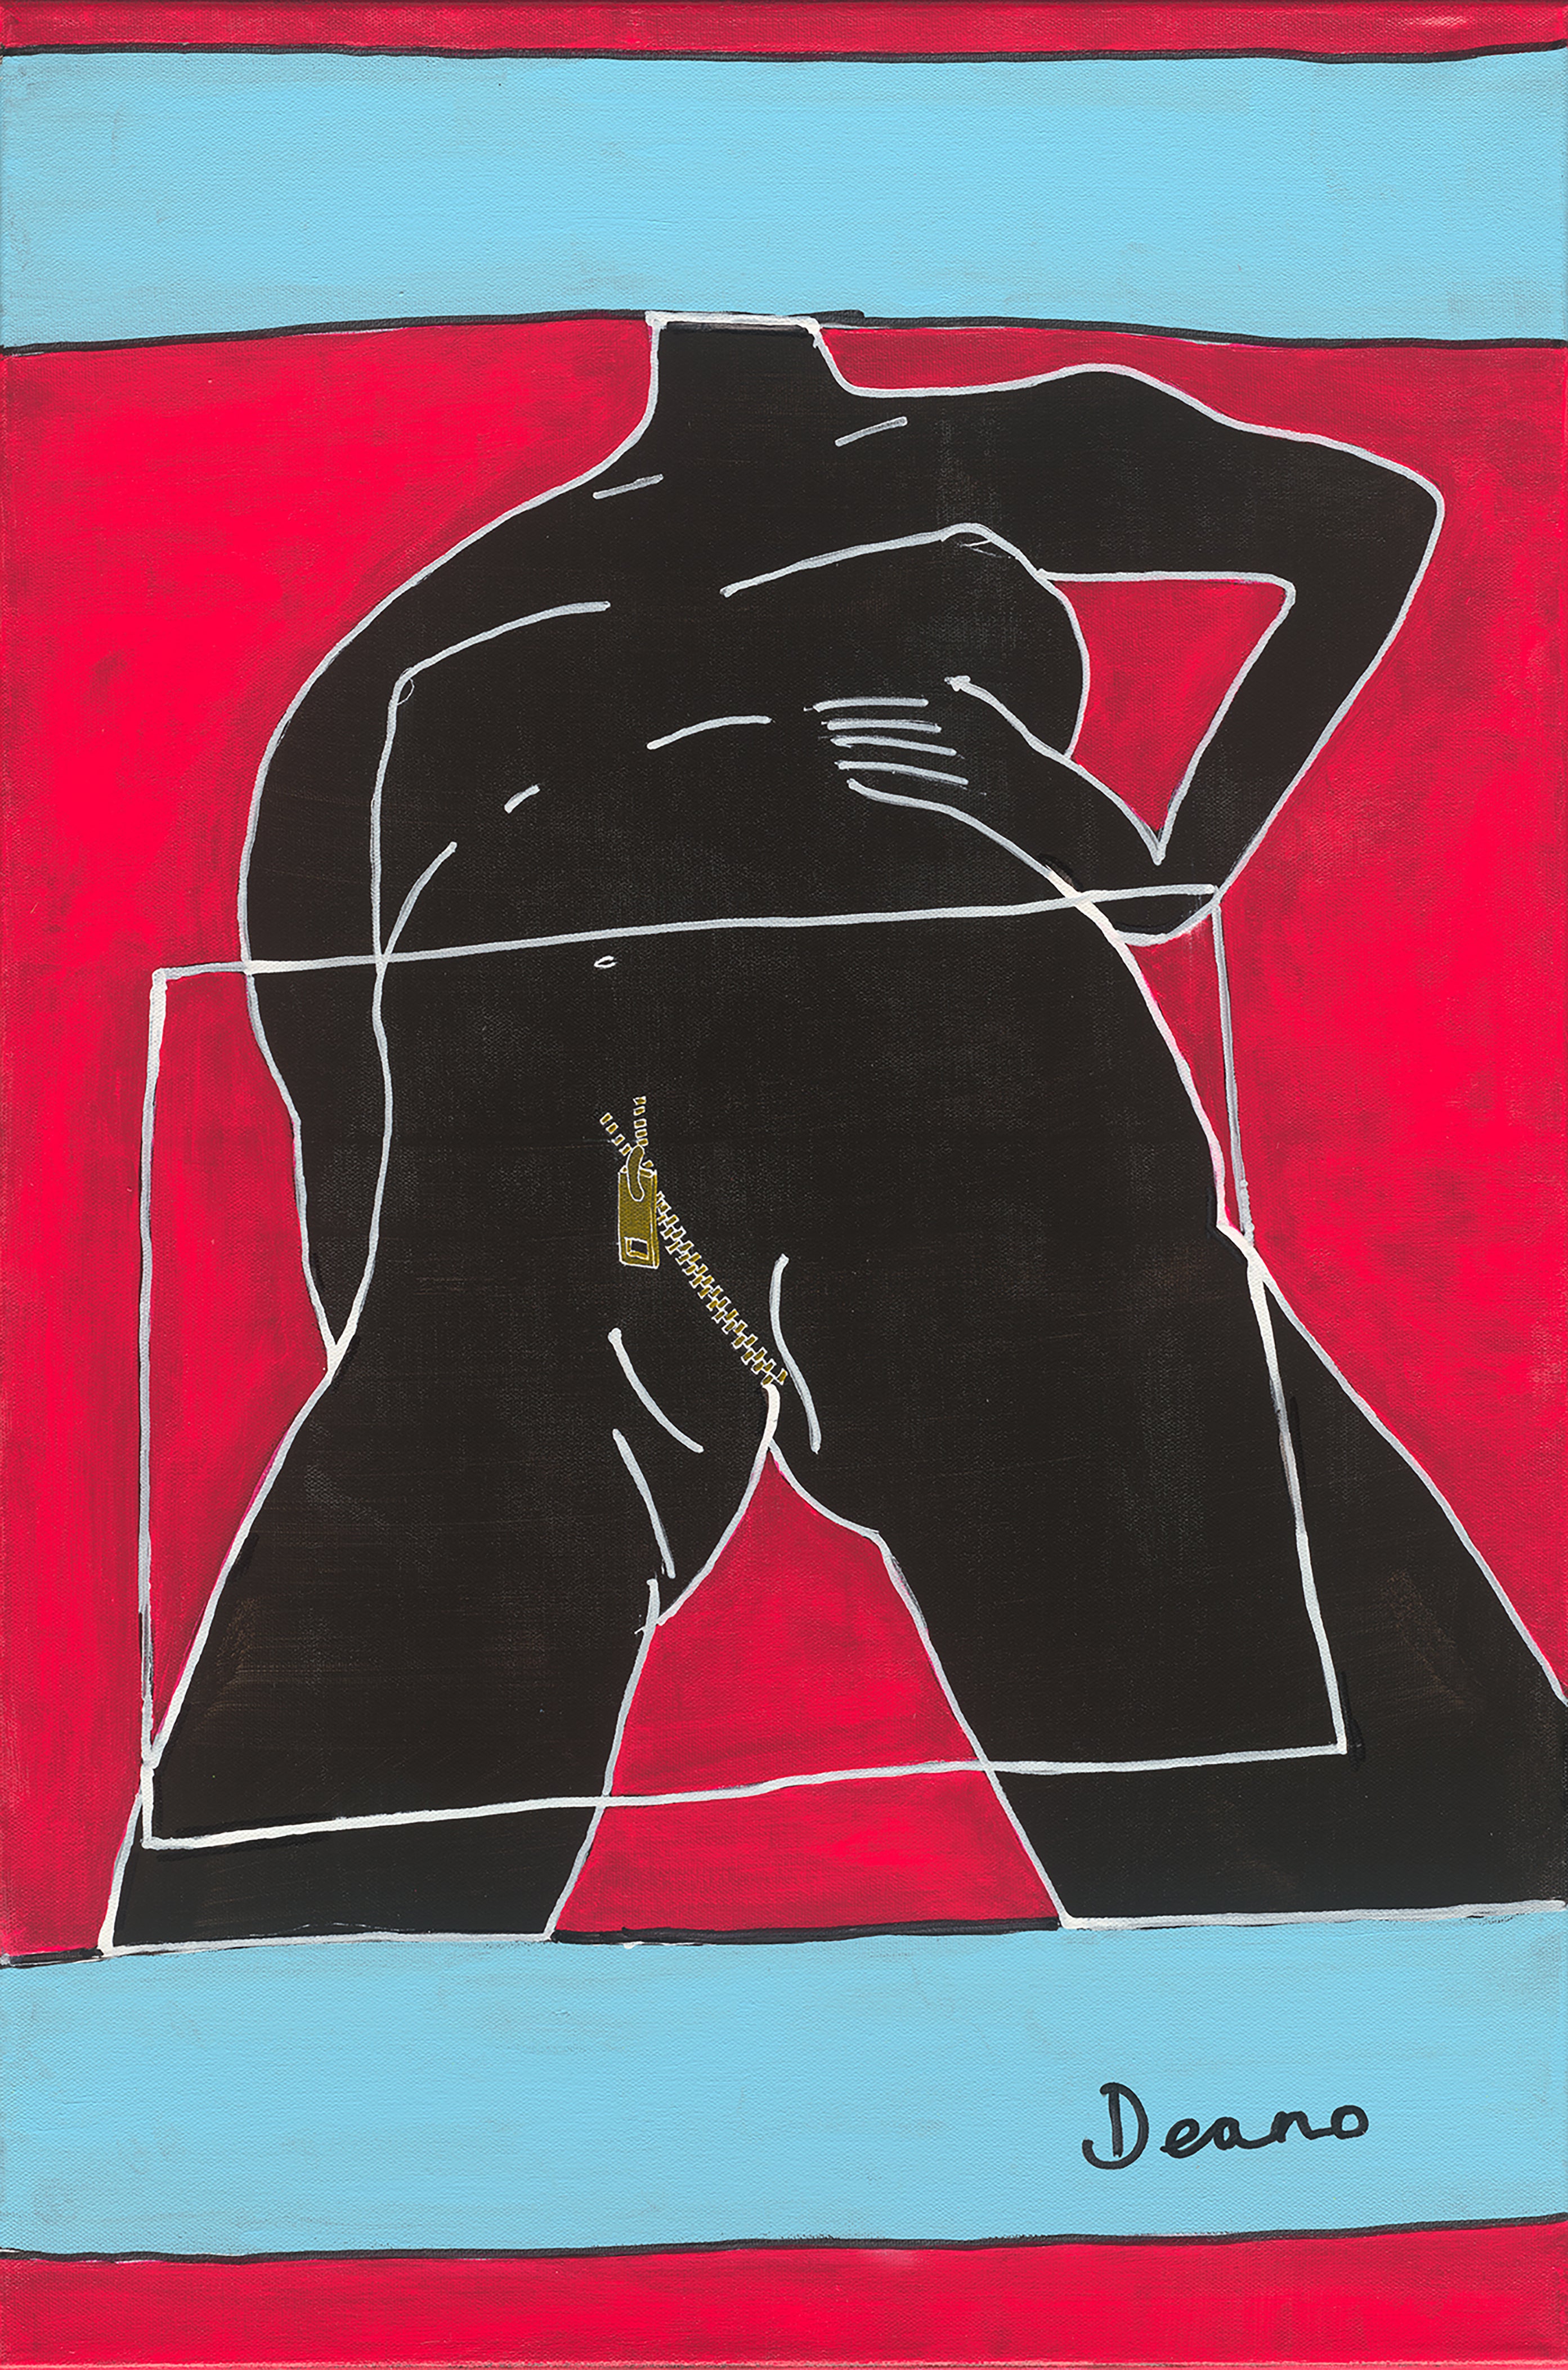 Original artwork titled ‘Diamond’ by Deano Hewitts. This captivating piece features an acrylic painting on canvas of a headless, monochromatic female figure, with a gold zip symbolising her genitals. The figure is placed against a vibrant pink backdrop. Created in 2022.